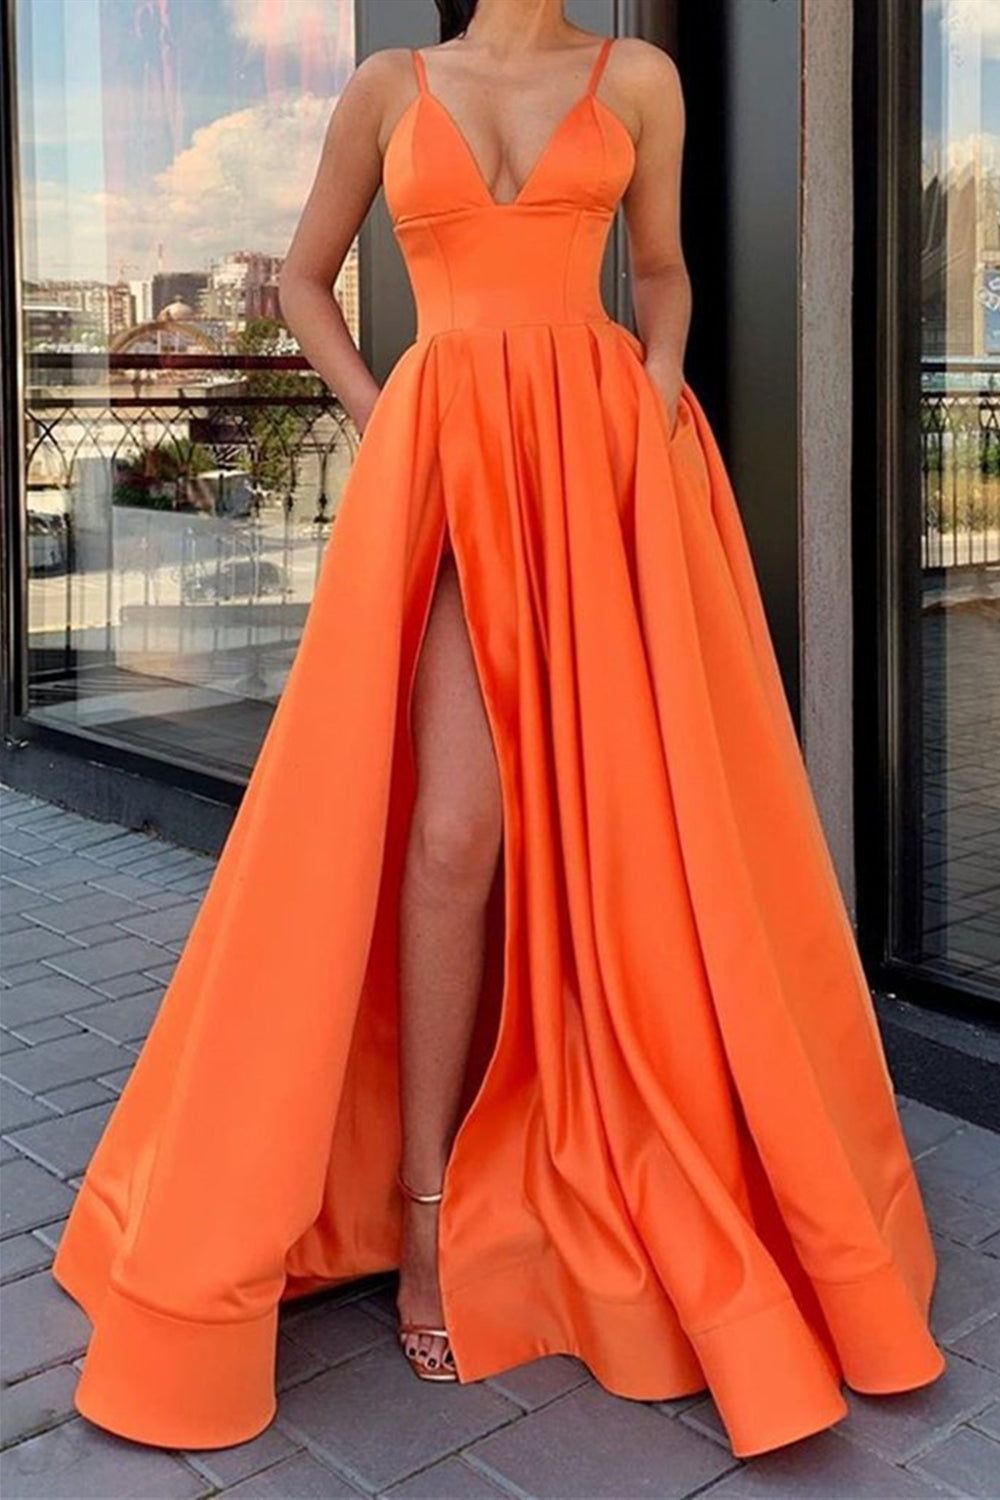 2022 Orange Velvet Mermaid Prom Dress With Feathers For Black Women, Luxury  Birthday Party & Formal Evening Gown From Sunnybridal01, $195.62 |  DHgate.Com